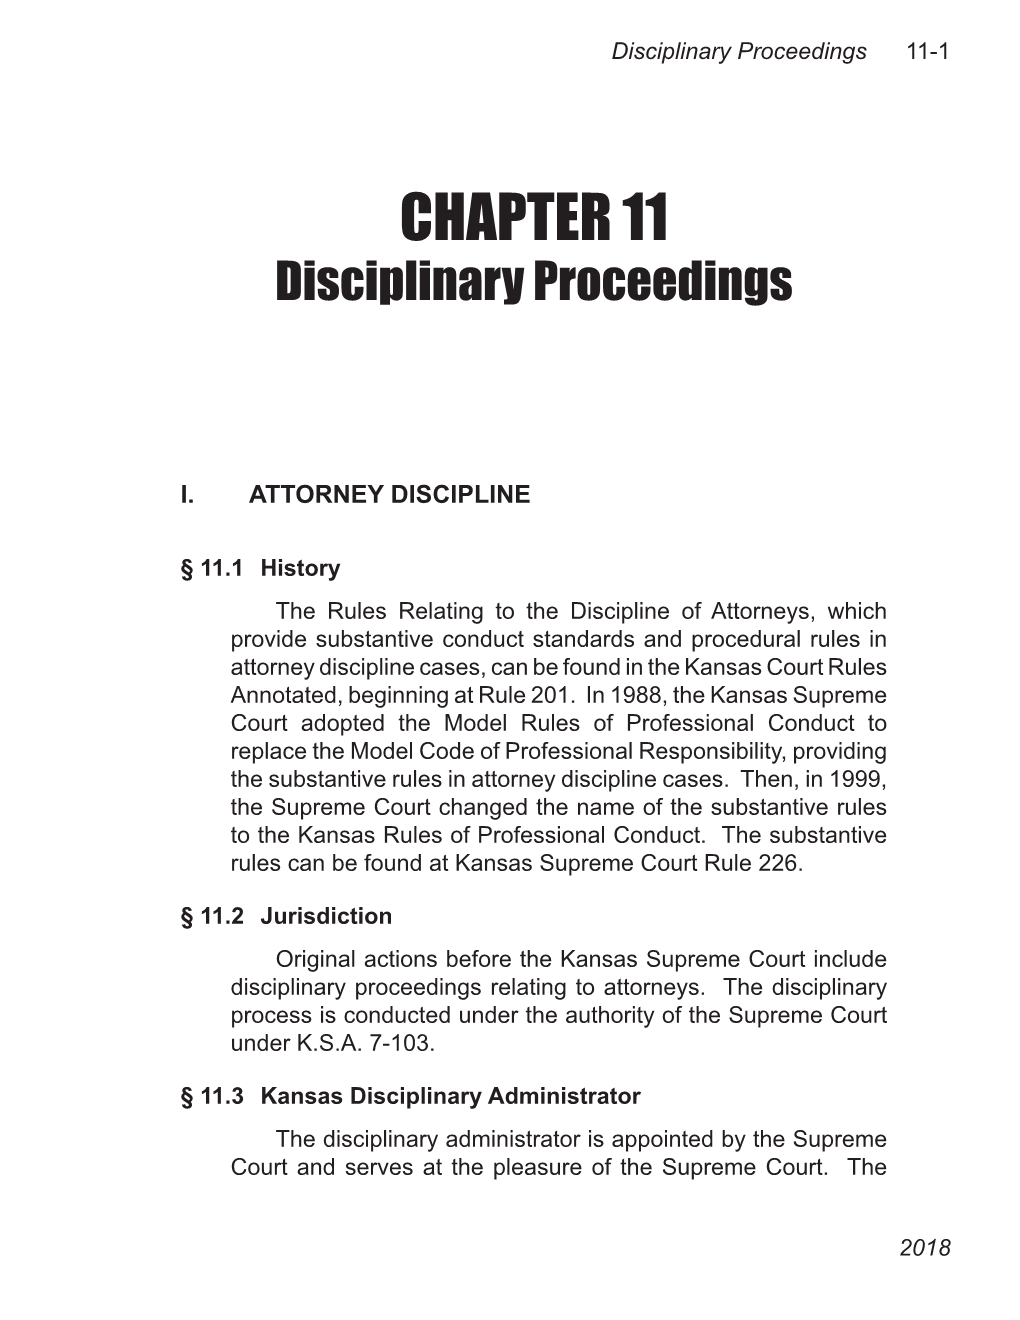 CHAPTER 11 Disciplinary Proceedings